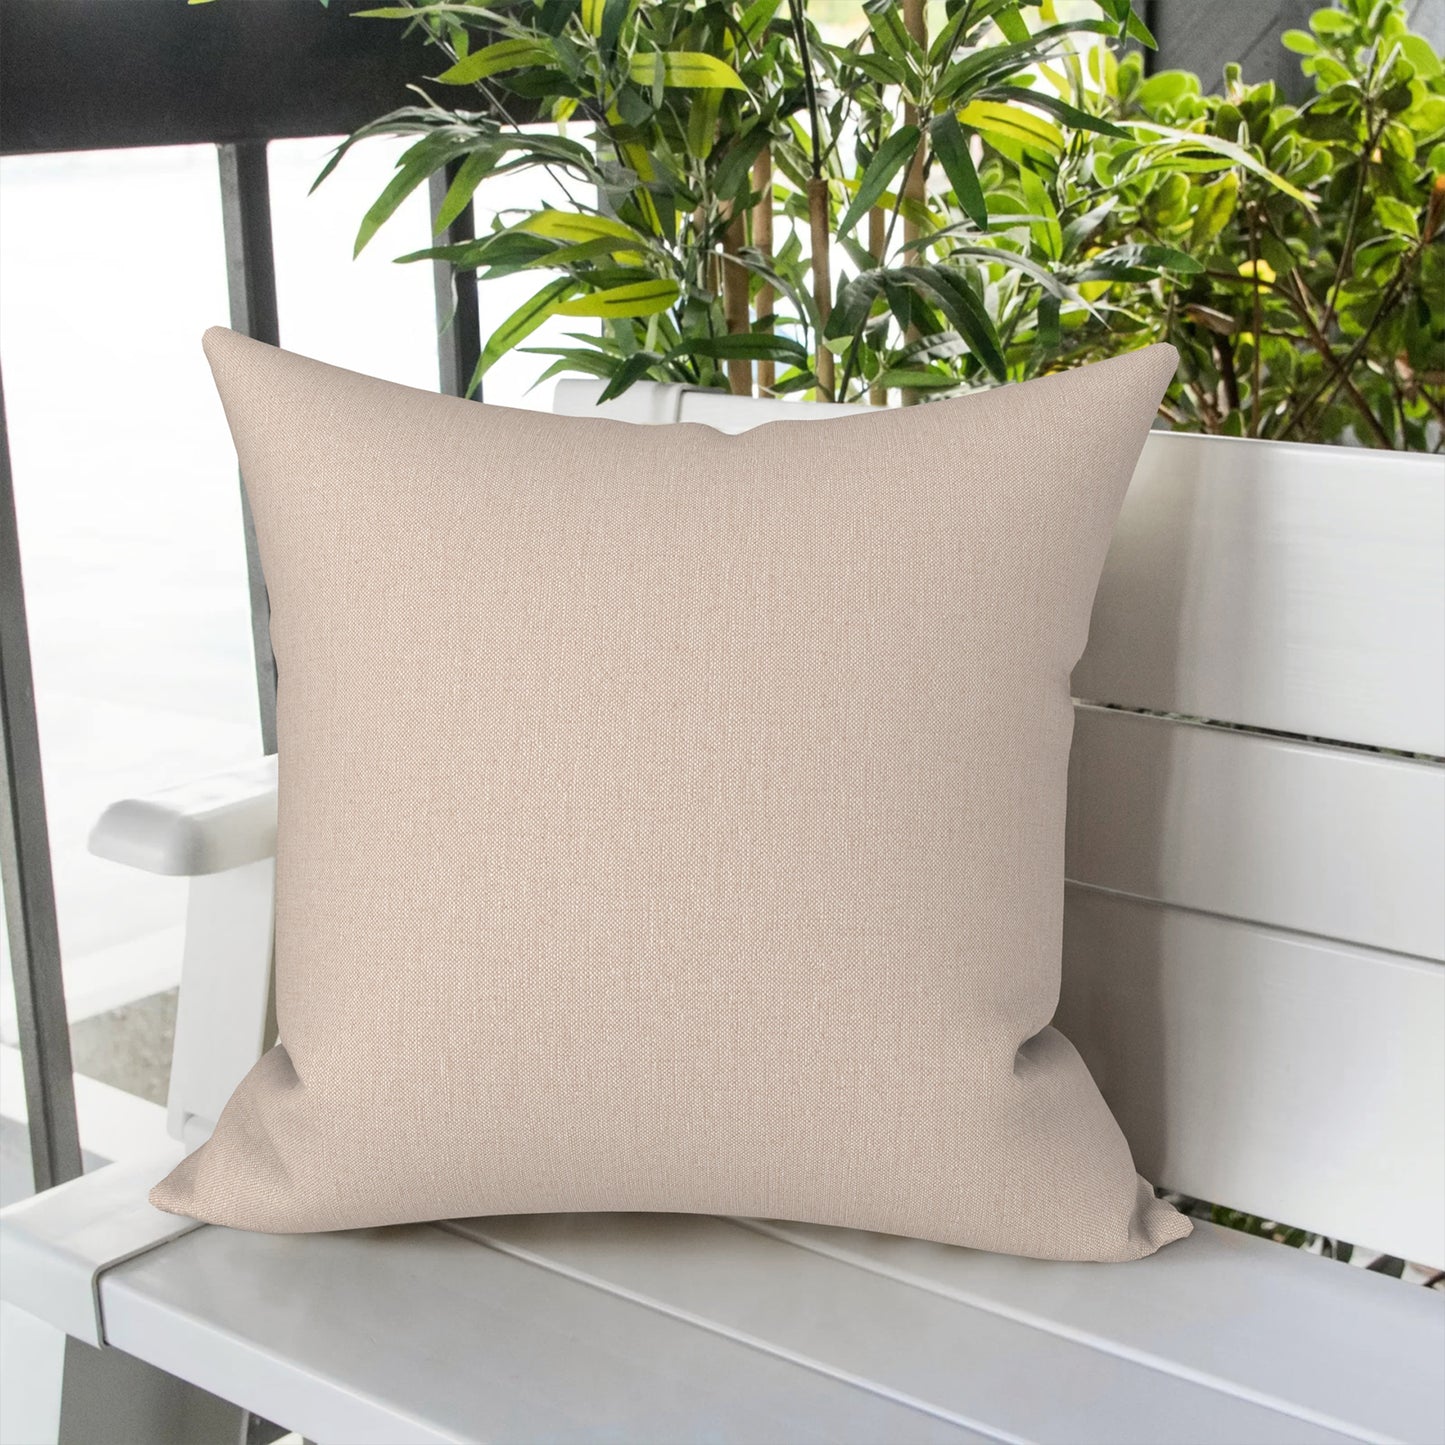 Melody Elephant Outdoor Throw Pillow Covers Pack of 2, Decorative Water Repellent Square Pillow Cases 18x18 Inch, Patio Pillowcases for Home Patio Furniture Use, Beige